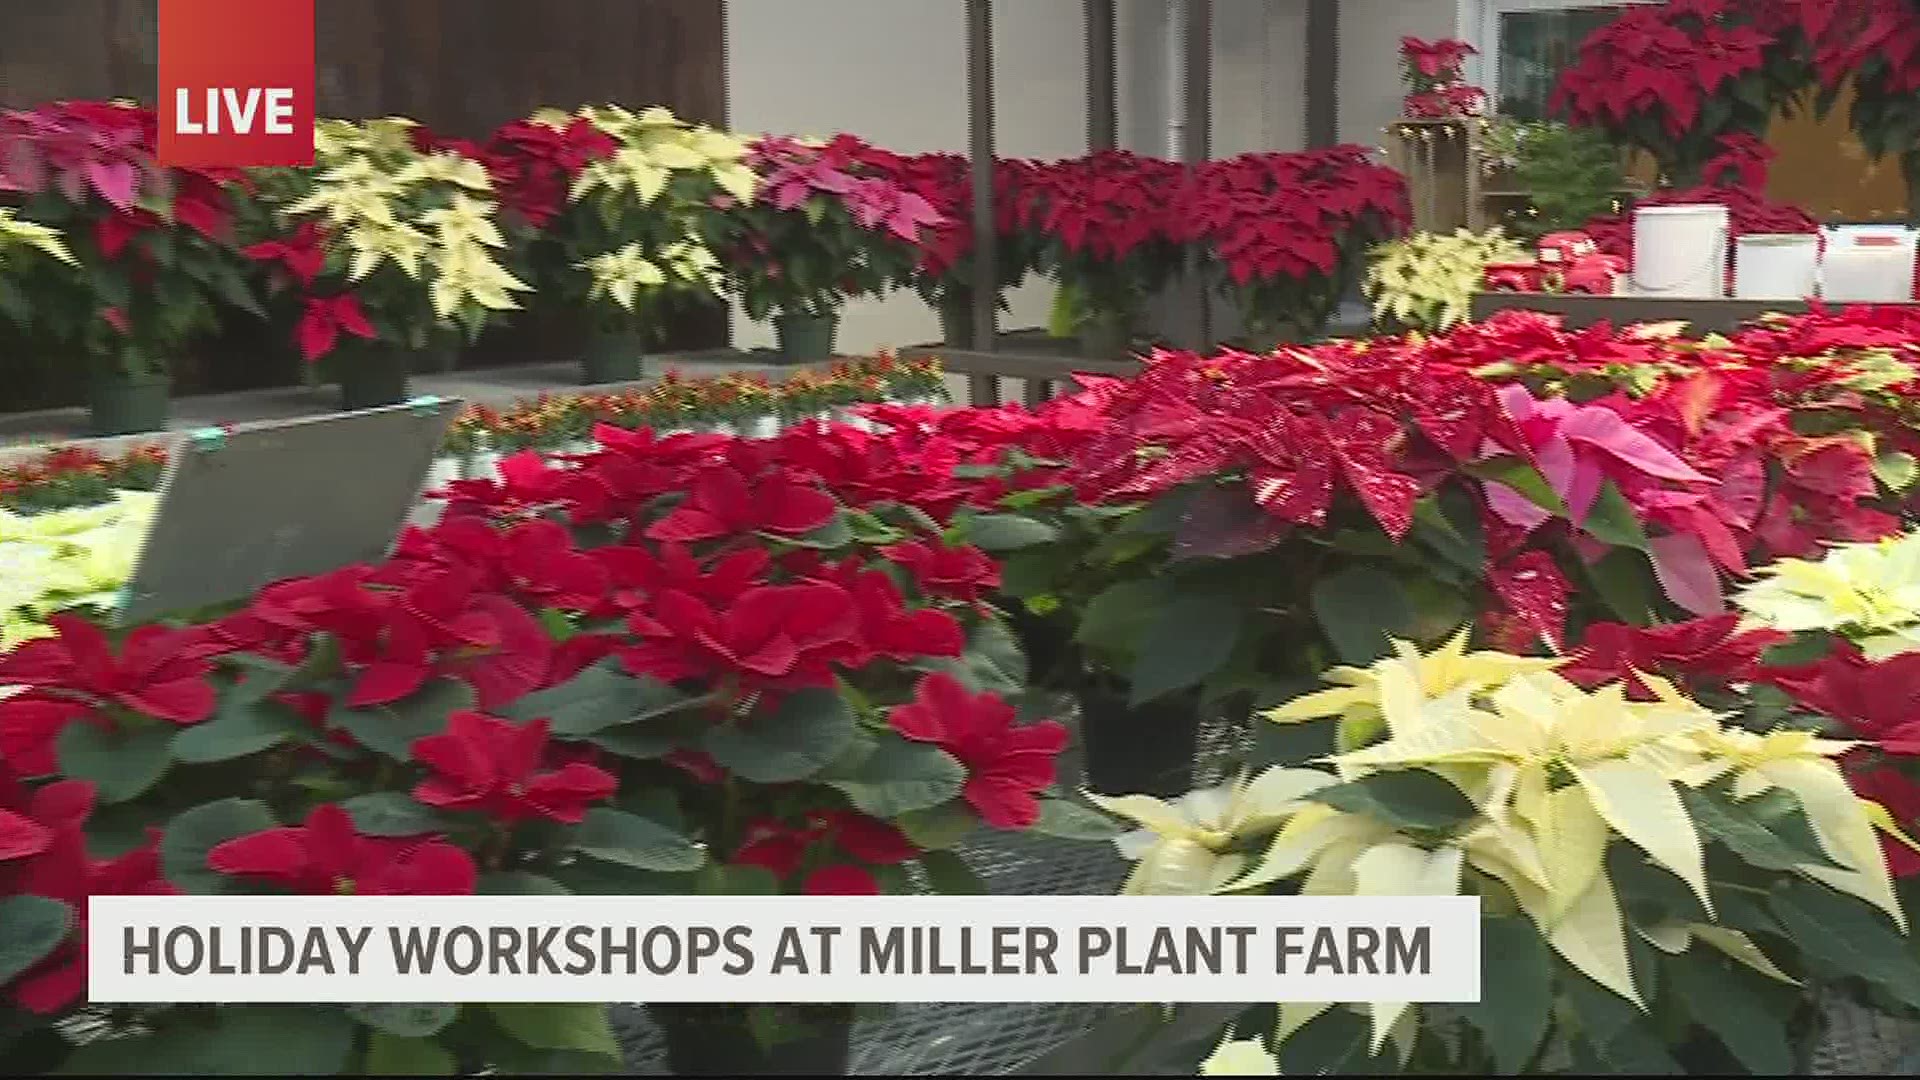 From holiday accents to house plants, wreaths, trees, and over 20 varieties of poinsettias... Miller Plant Farm is Santa's workshop to your Christmas greenery.